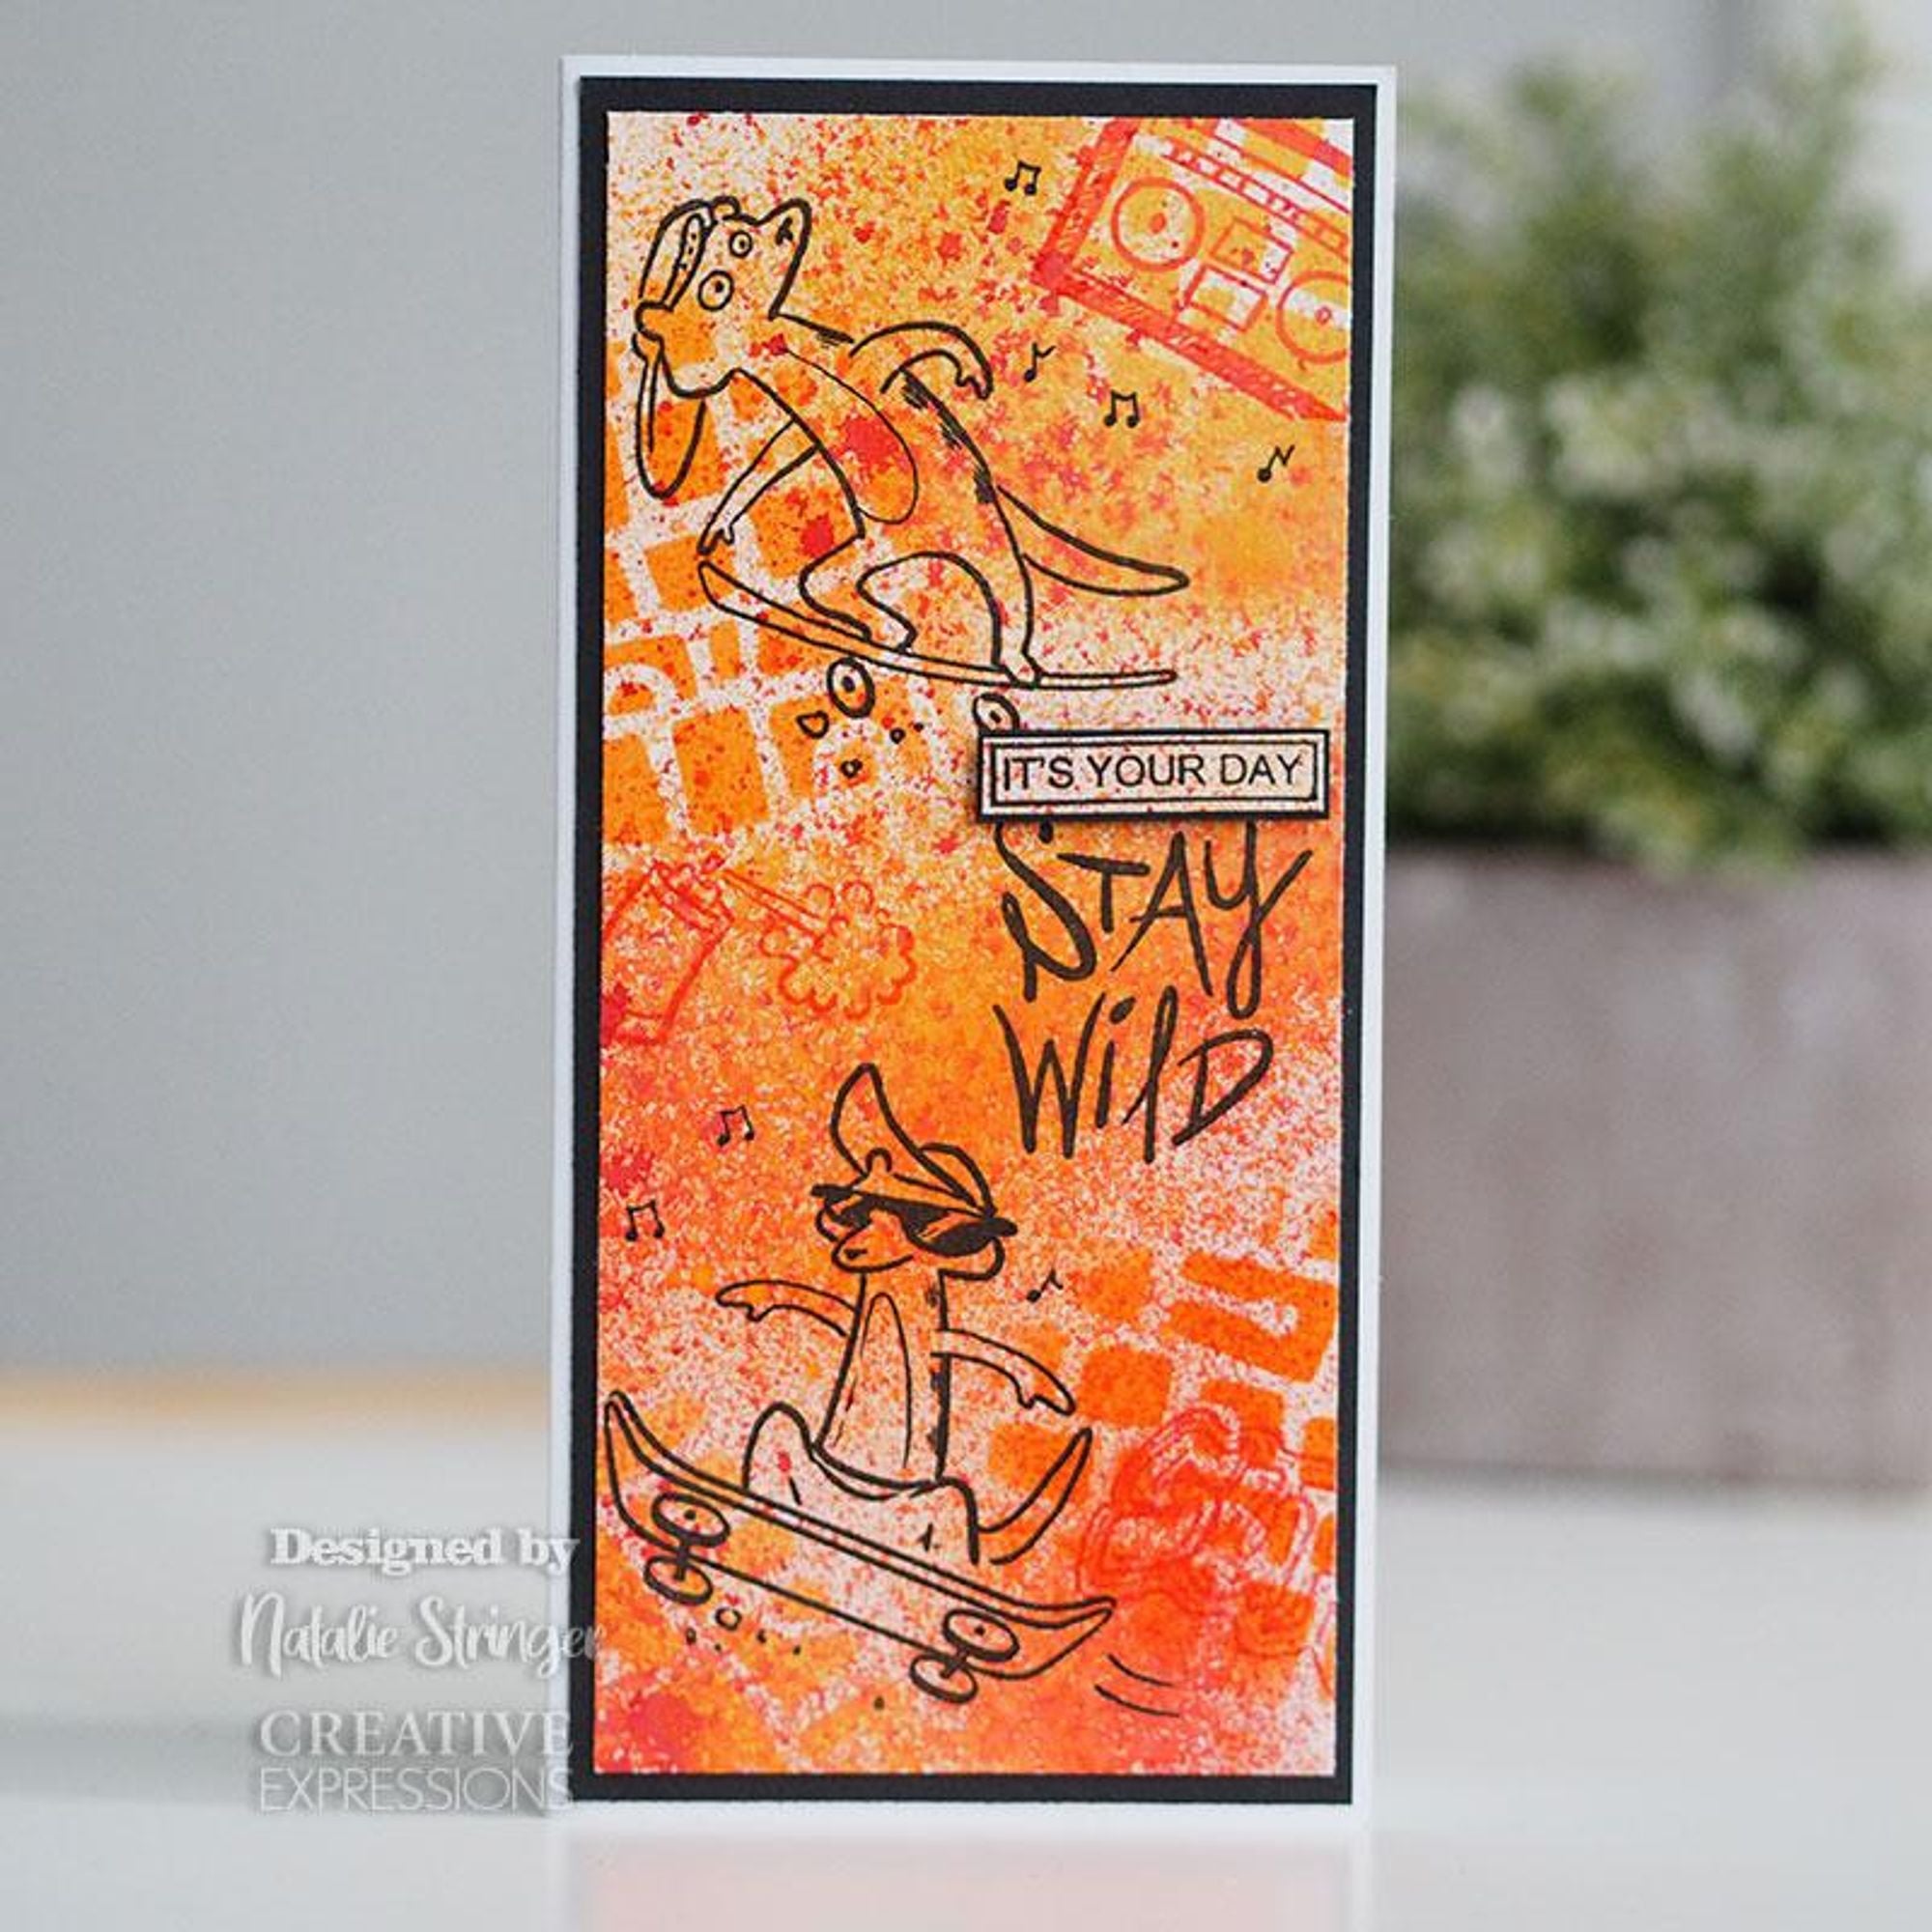 Creative Expressions Designer Boutique Collection Musical Meerkats A5 Clear Stamp